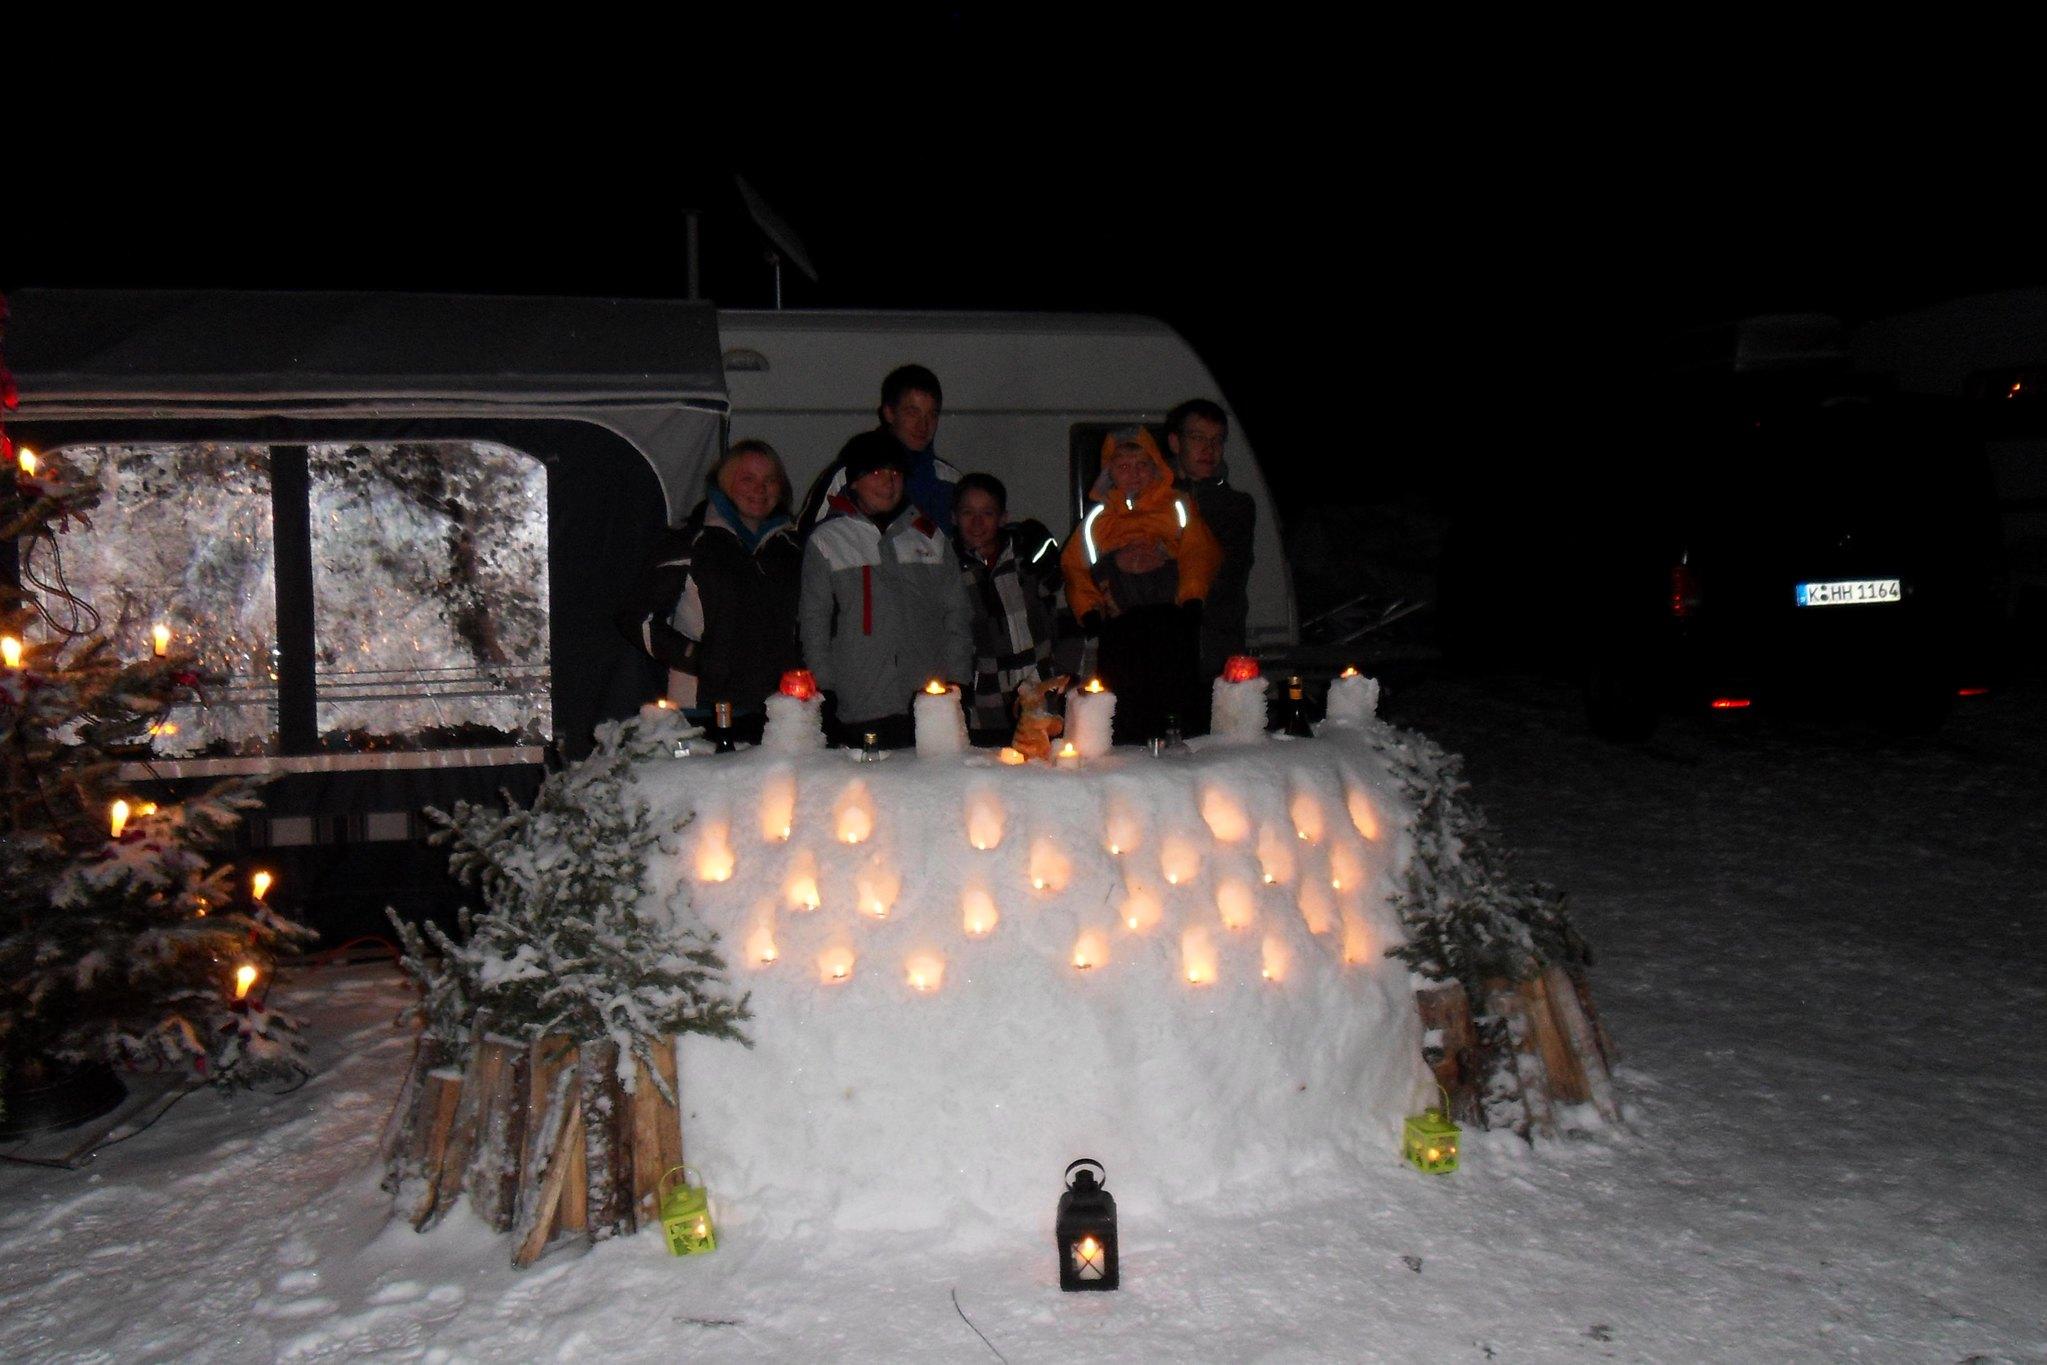 What does camping look like in winter? – image 3